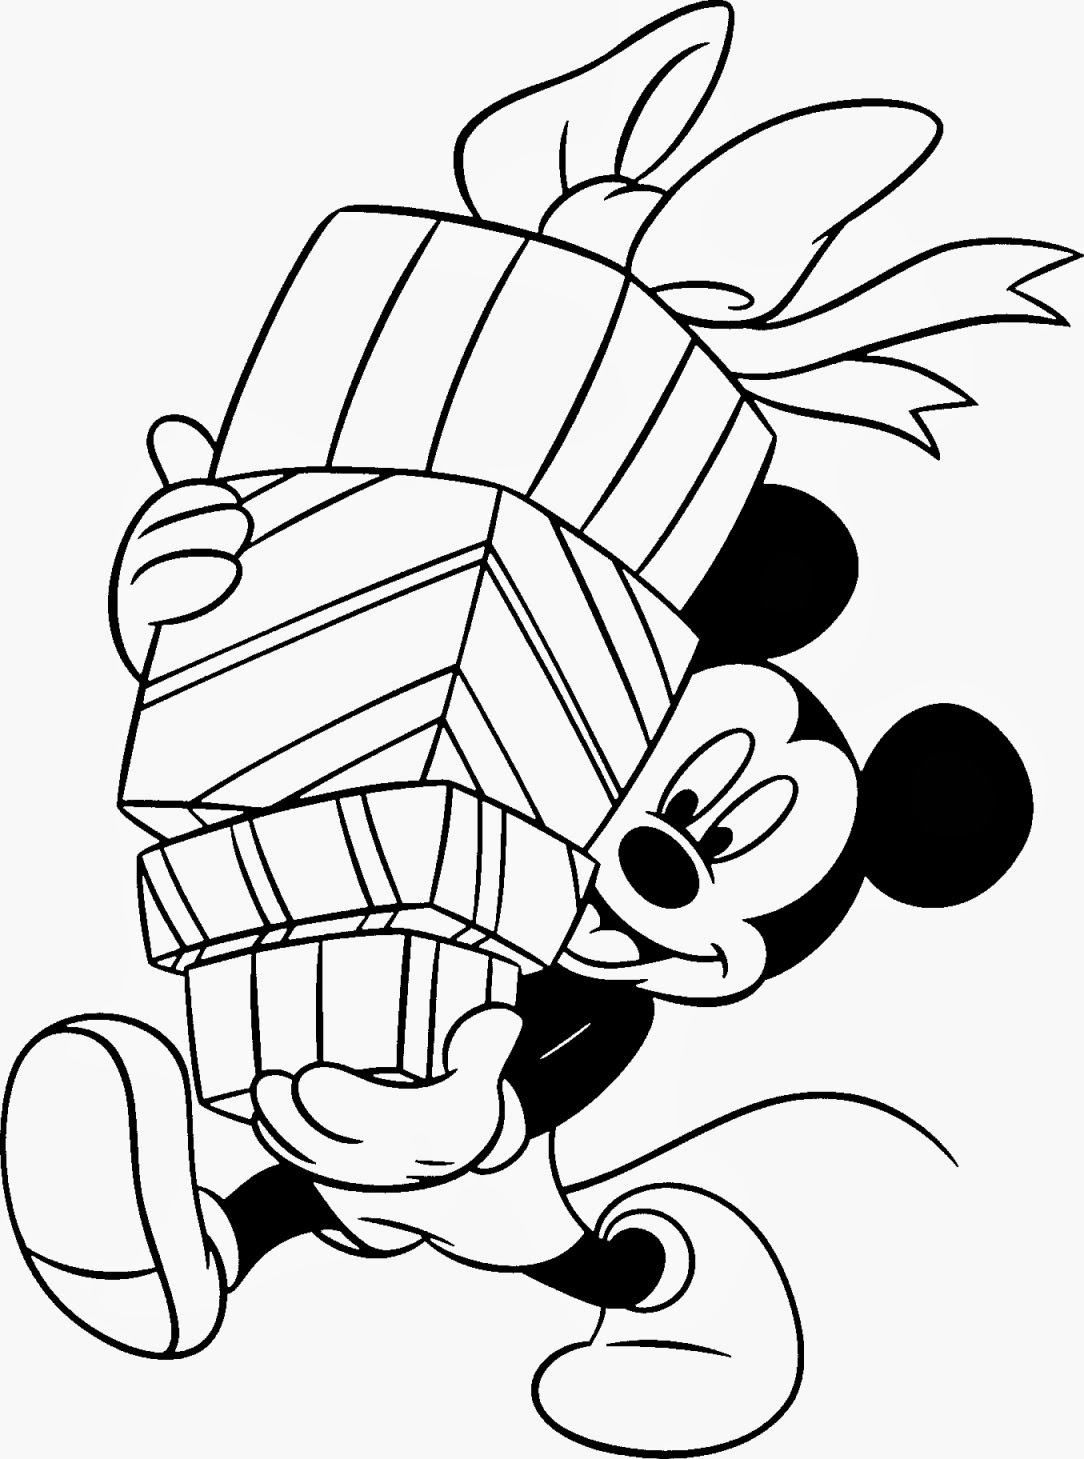 Top 10 Disney Christmas Coloring Pages For Kids Coloring Wallpapers Download Free Images Wallpaper [coloring654.blogspot.com]